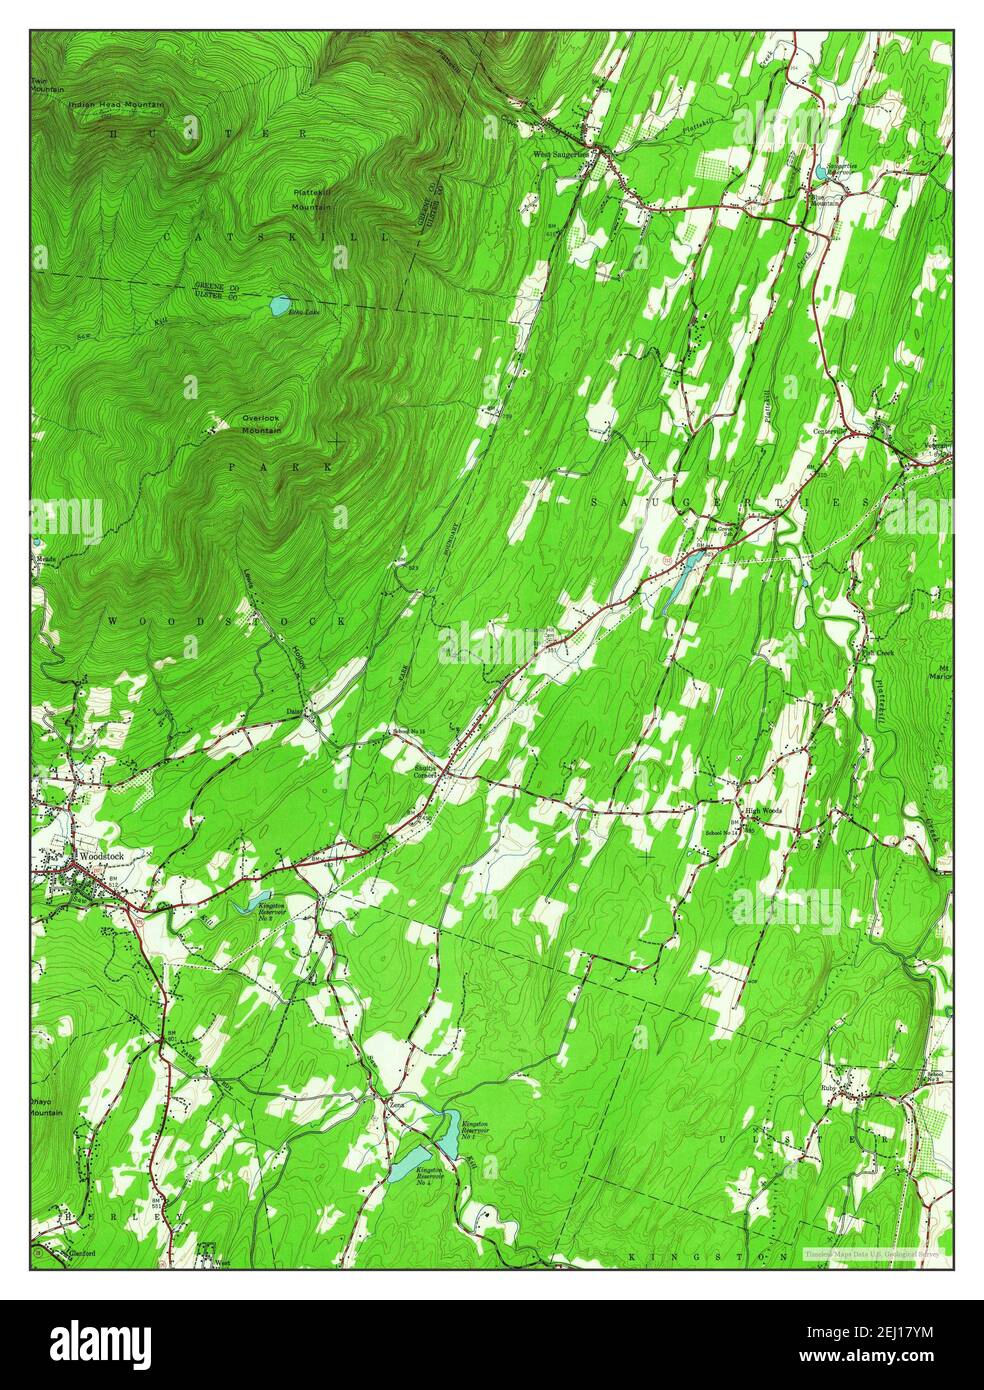 Woodstock, New York, map 1945, 1:24000, United States of America by  Timeless Maps, data U.S. Geological Survey Stock Photo - Alamy